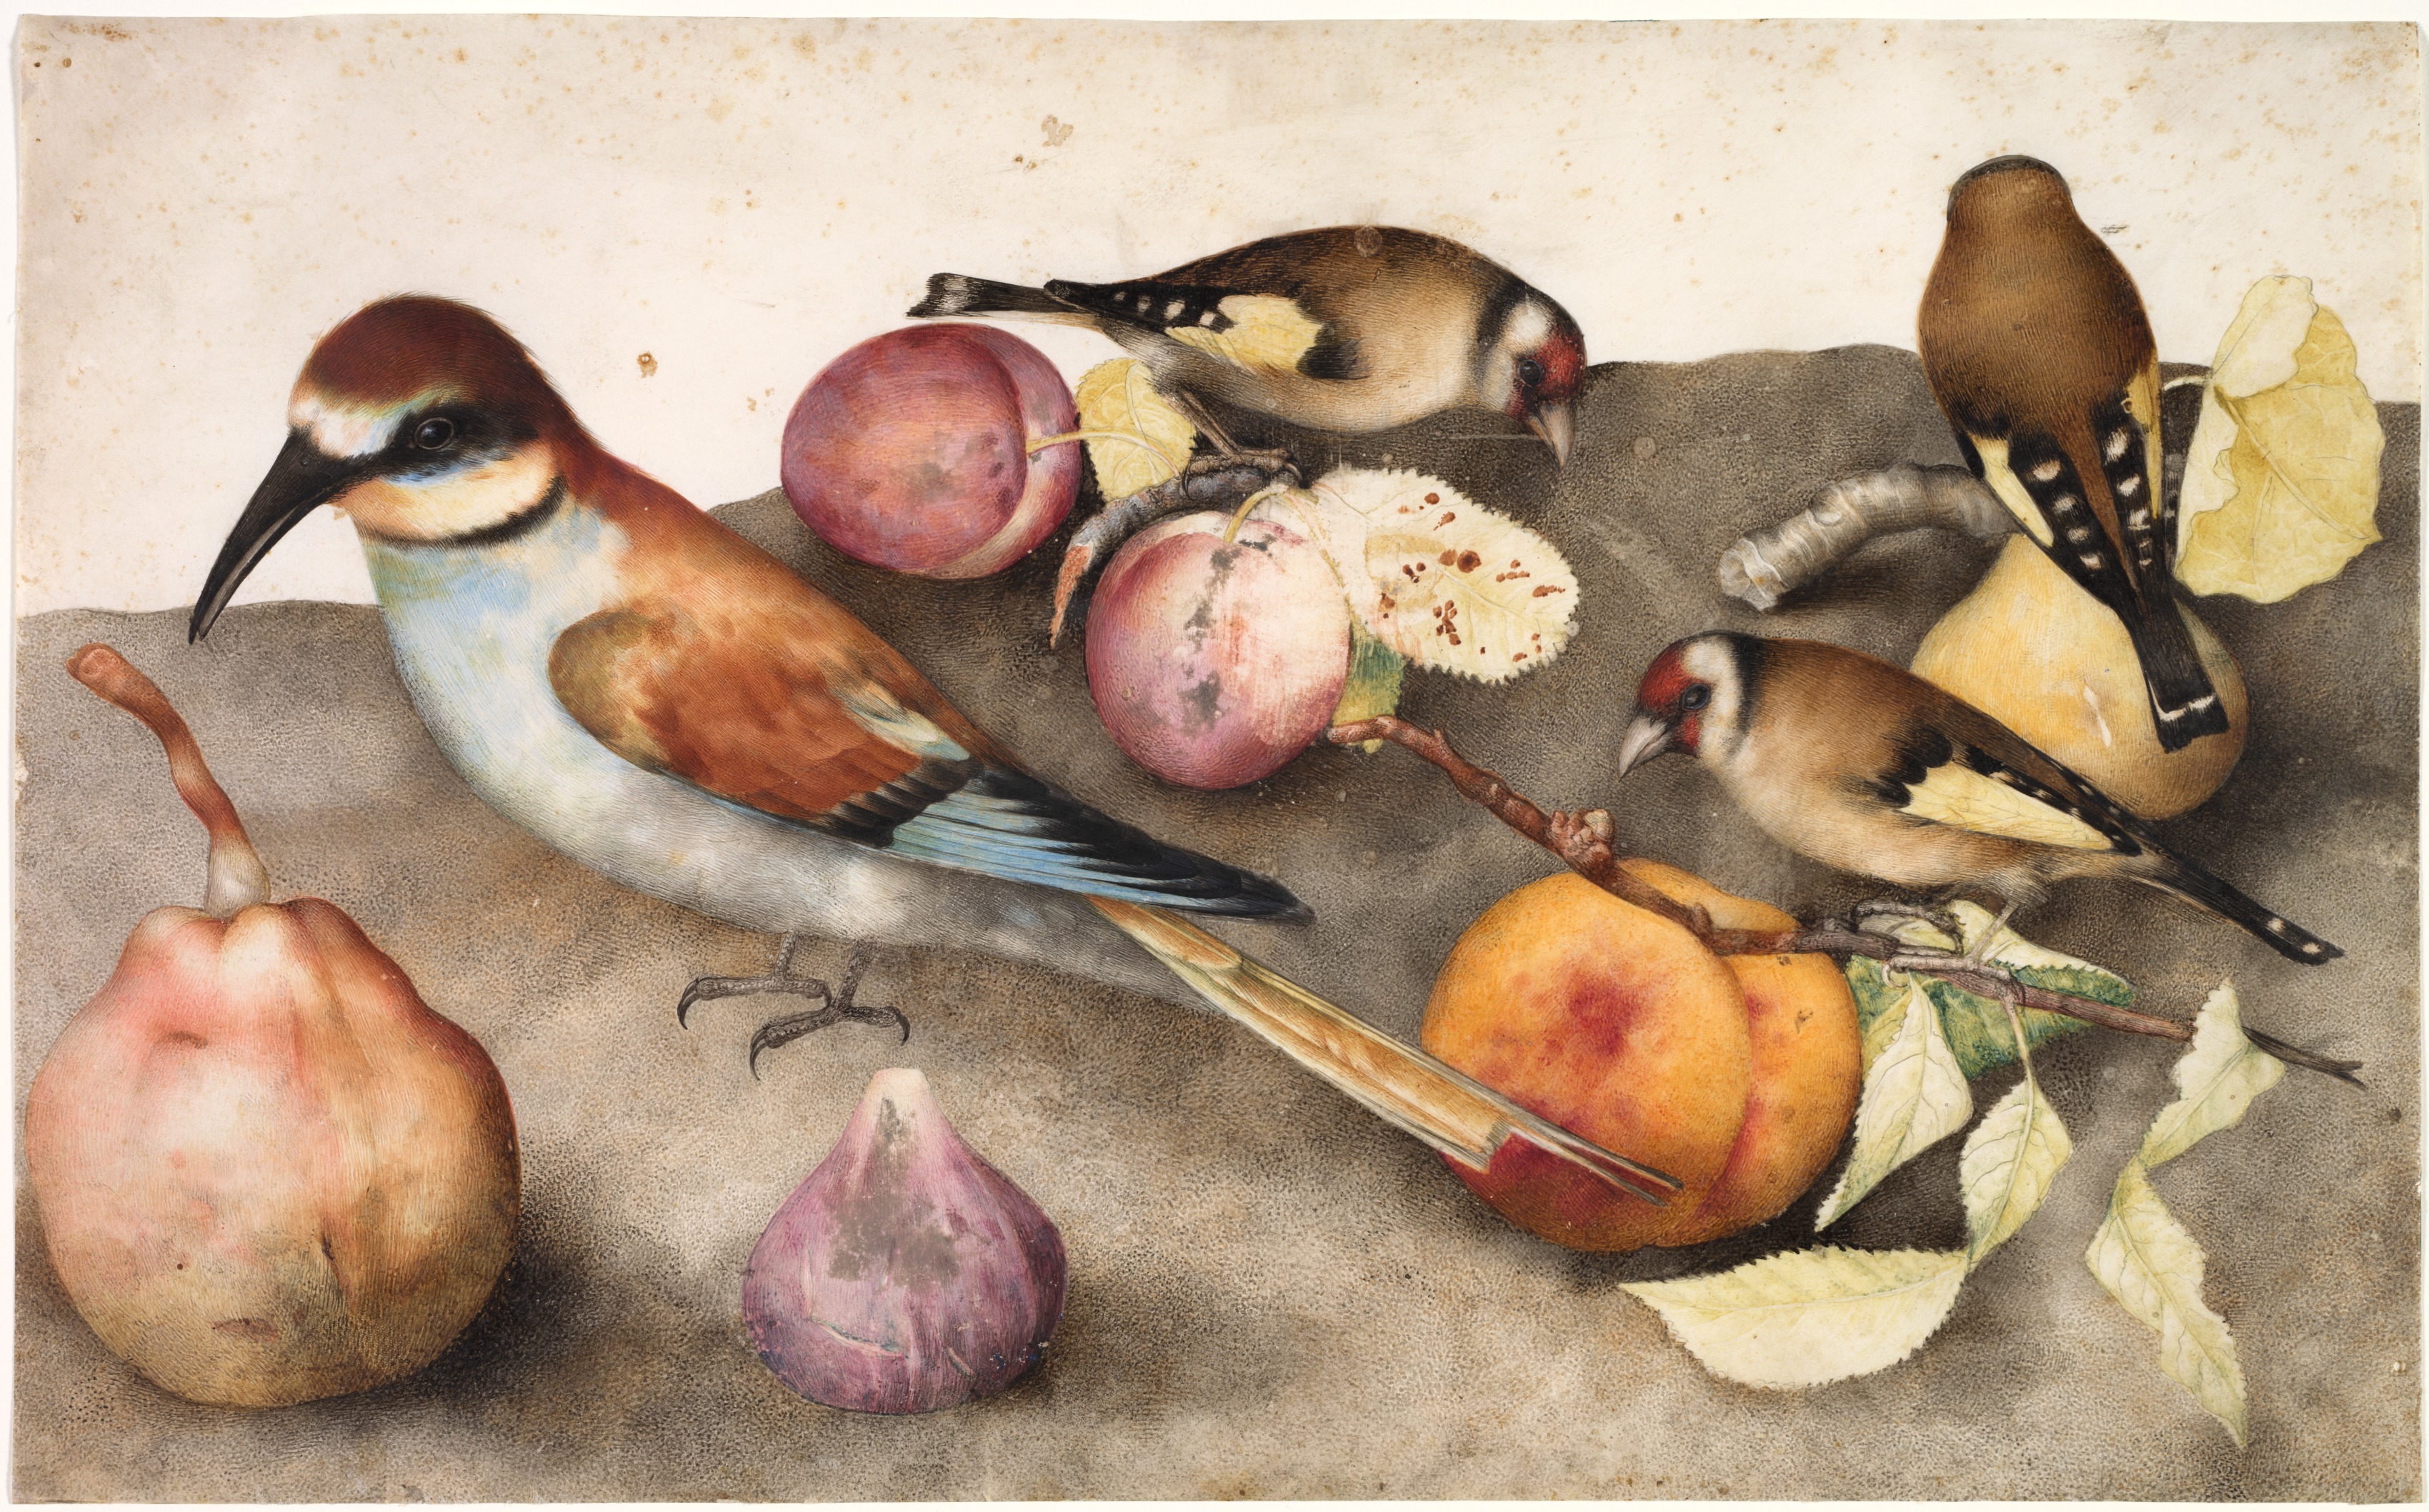 Still Life with Birds and Fruit by Giovanna Garzoni - 17th century - 25.7 x 41.6 cm Cleveland Museum of Art